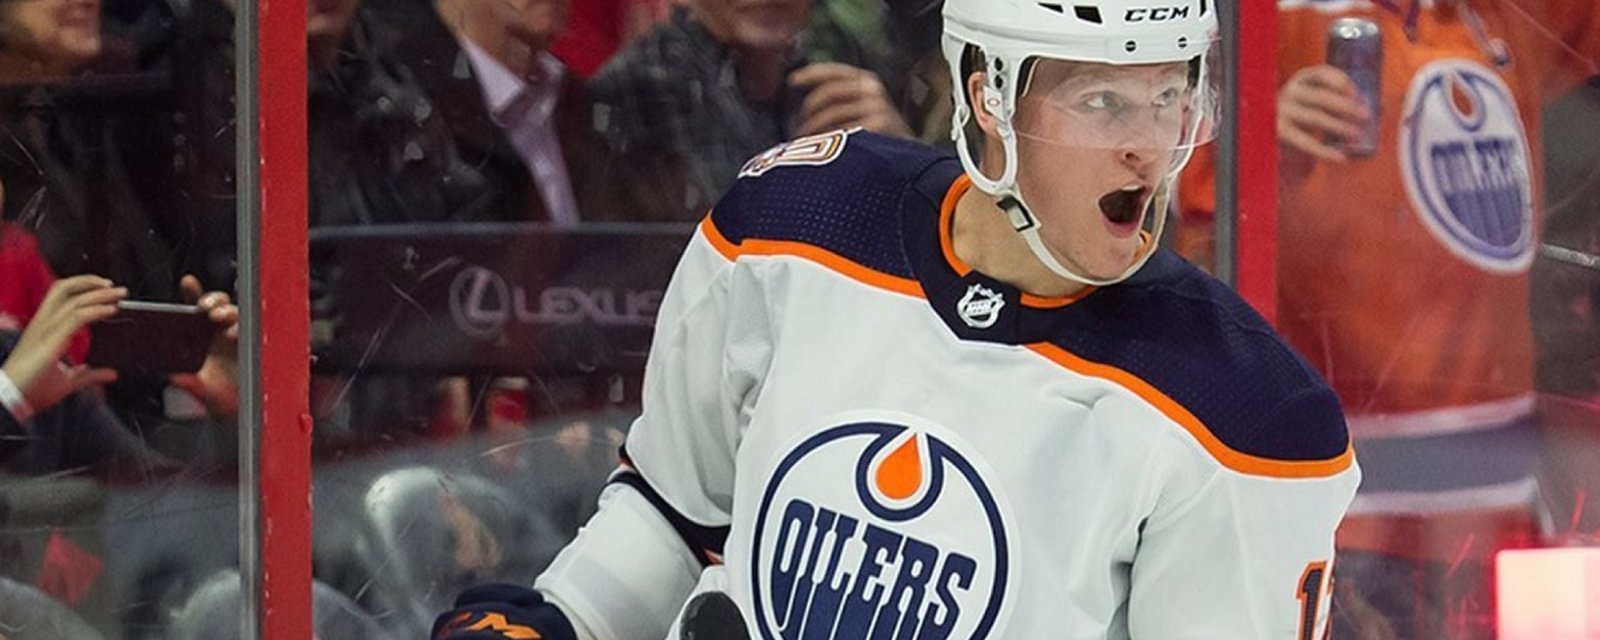 Connor McDavid speaks on the passing of Colby Cave.